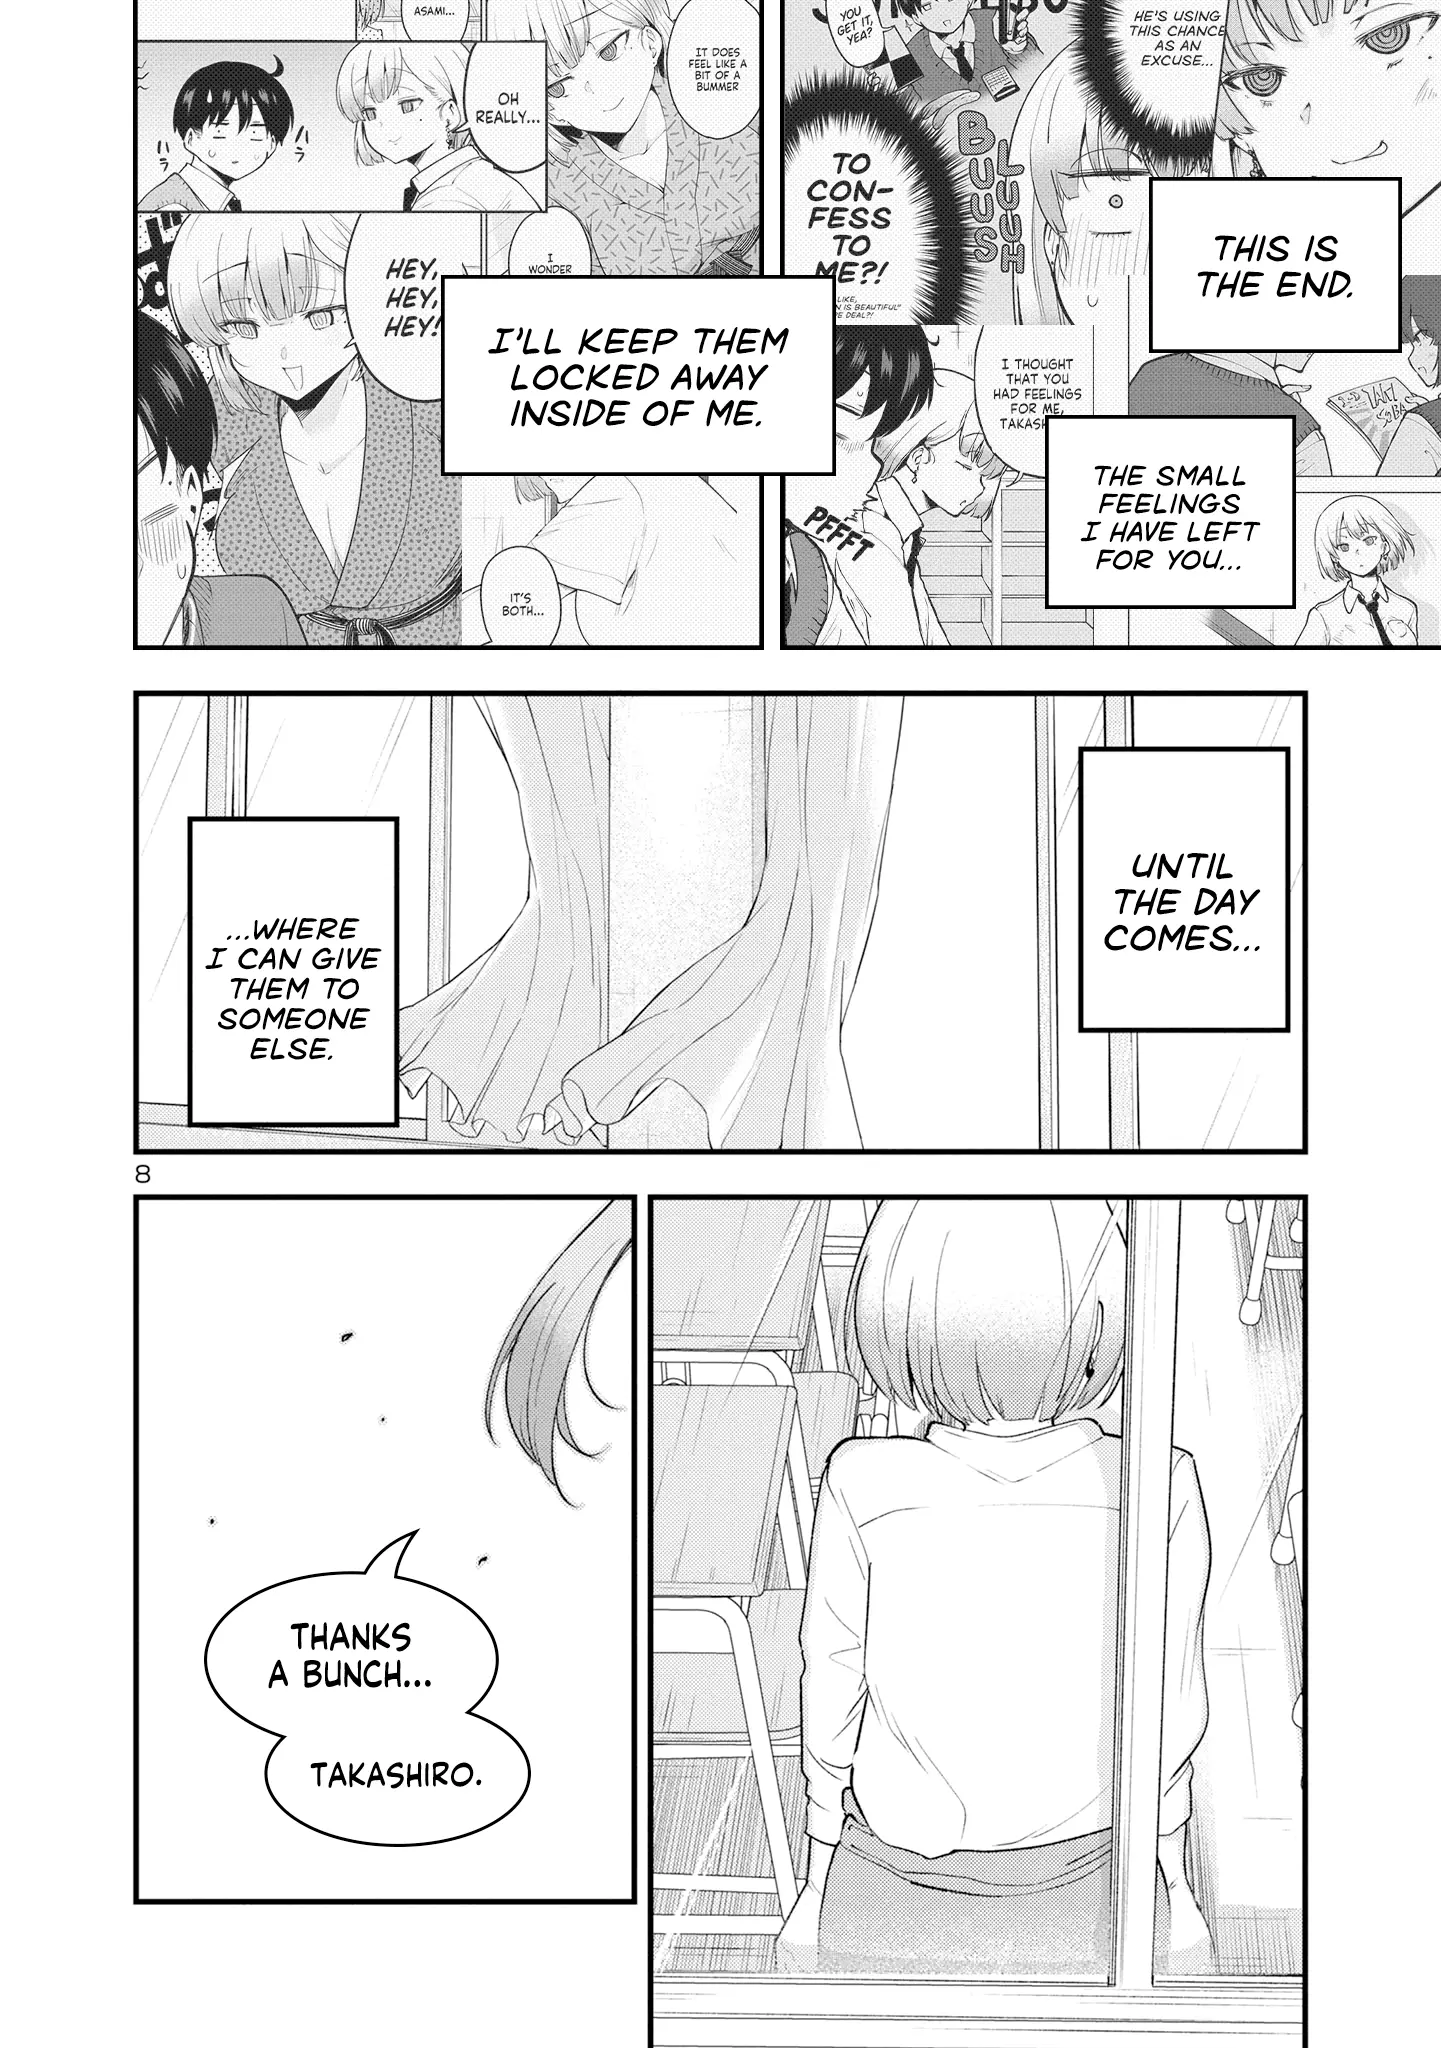 Meika-San Can't Conceal Her Emotions - 150 page 8-22ce4235